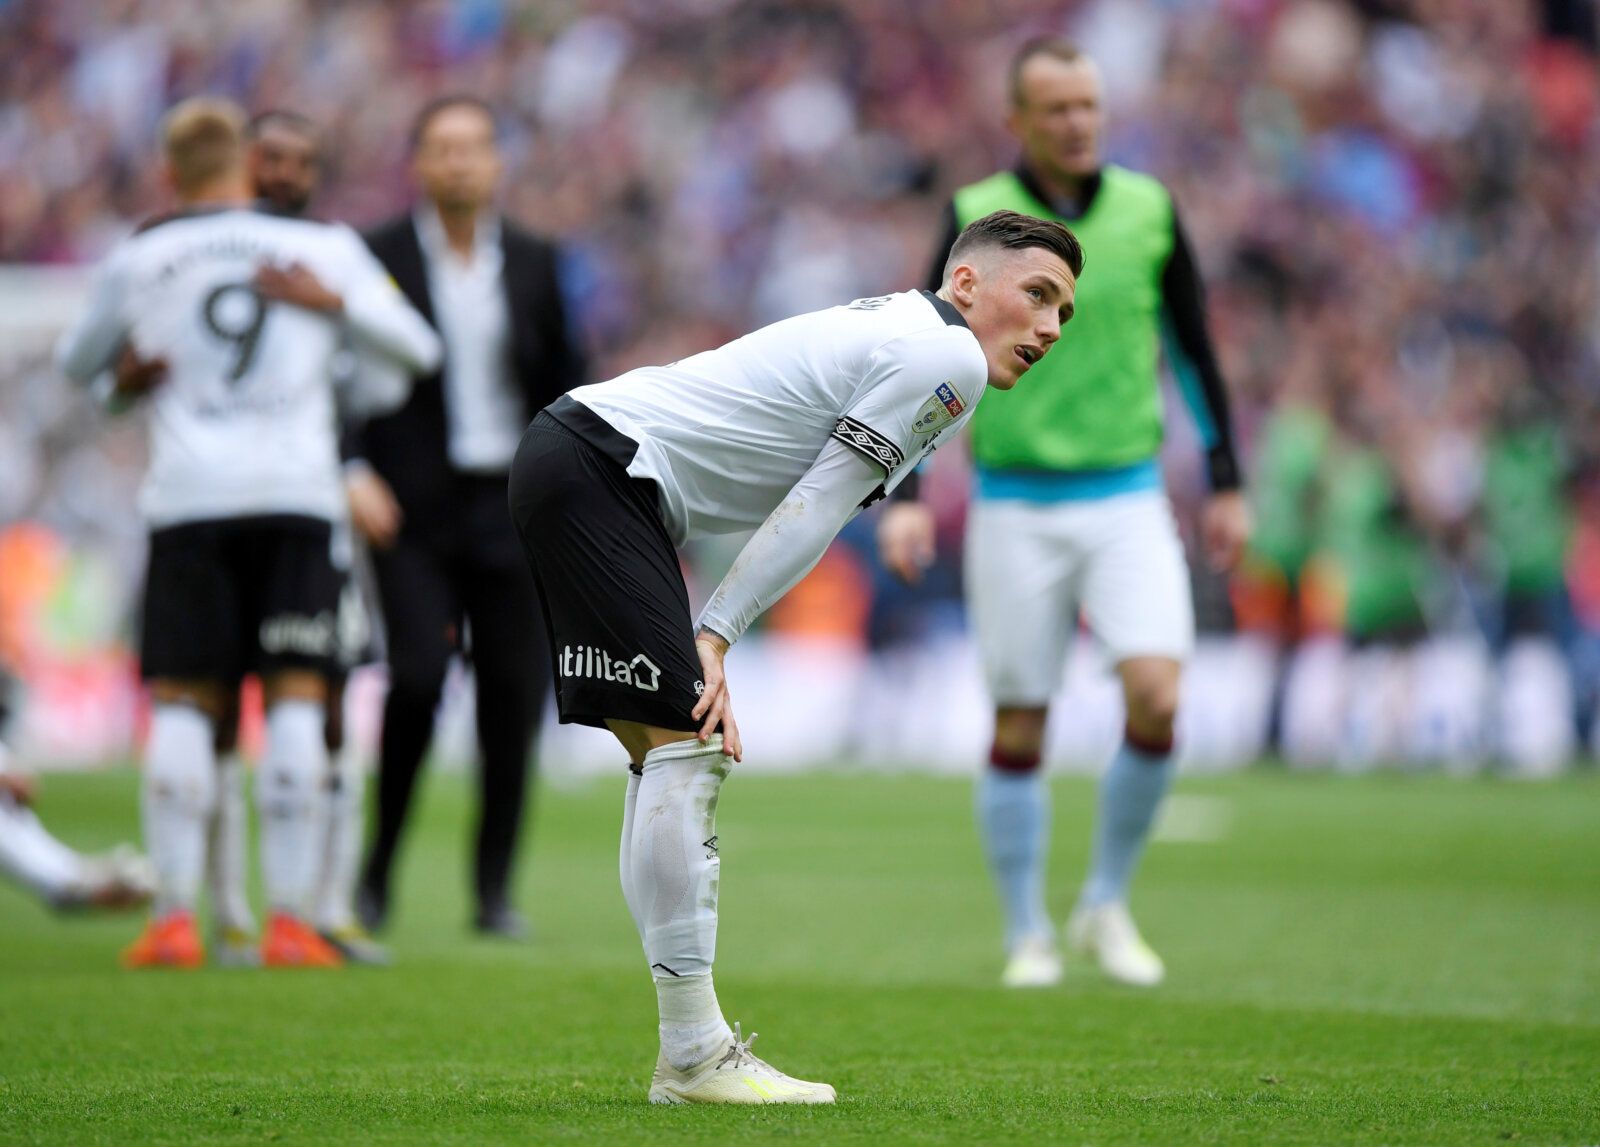 Soccer Football - Championship Playoff Final - Aston Villa v Derby County - Wembley Stadium, London, Britain - May 27, 2019  Derby County's Harry Wilson looks dejected after the match   Action Images via Reuters/Tony O'Brien